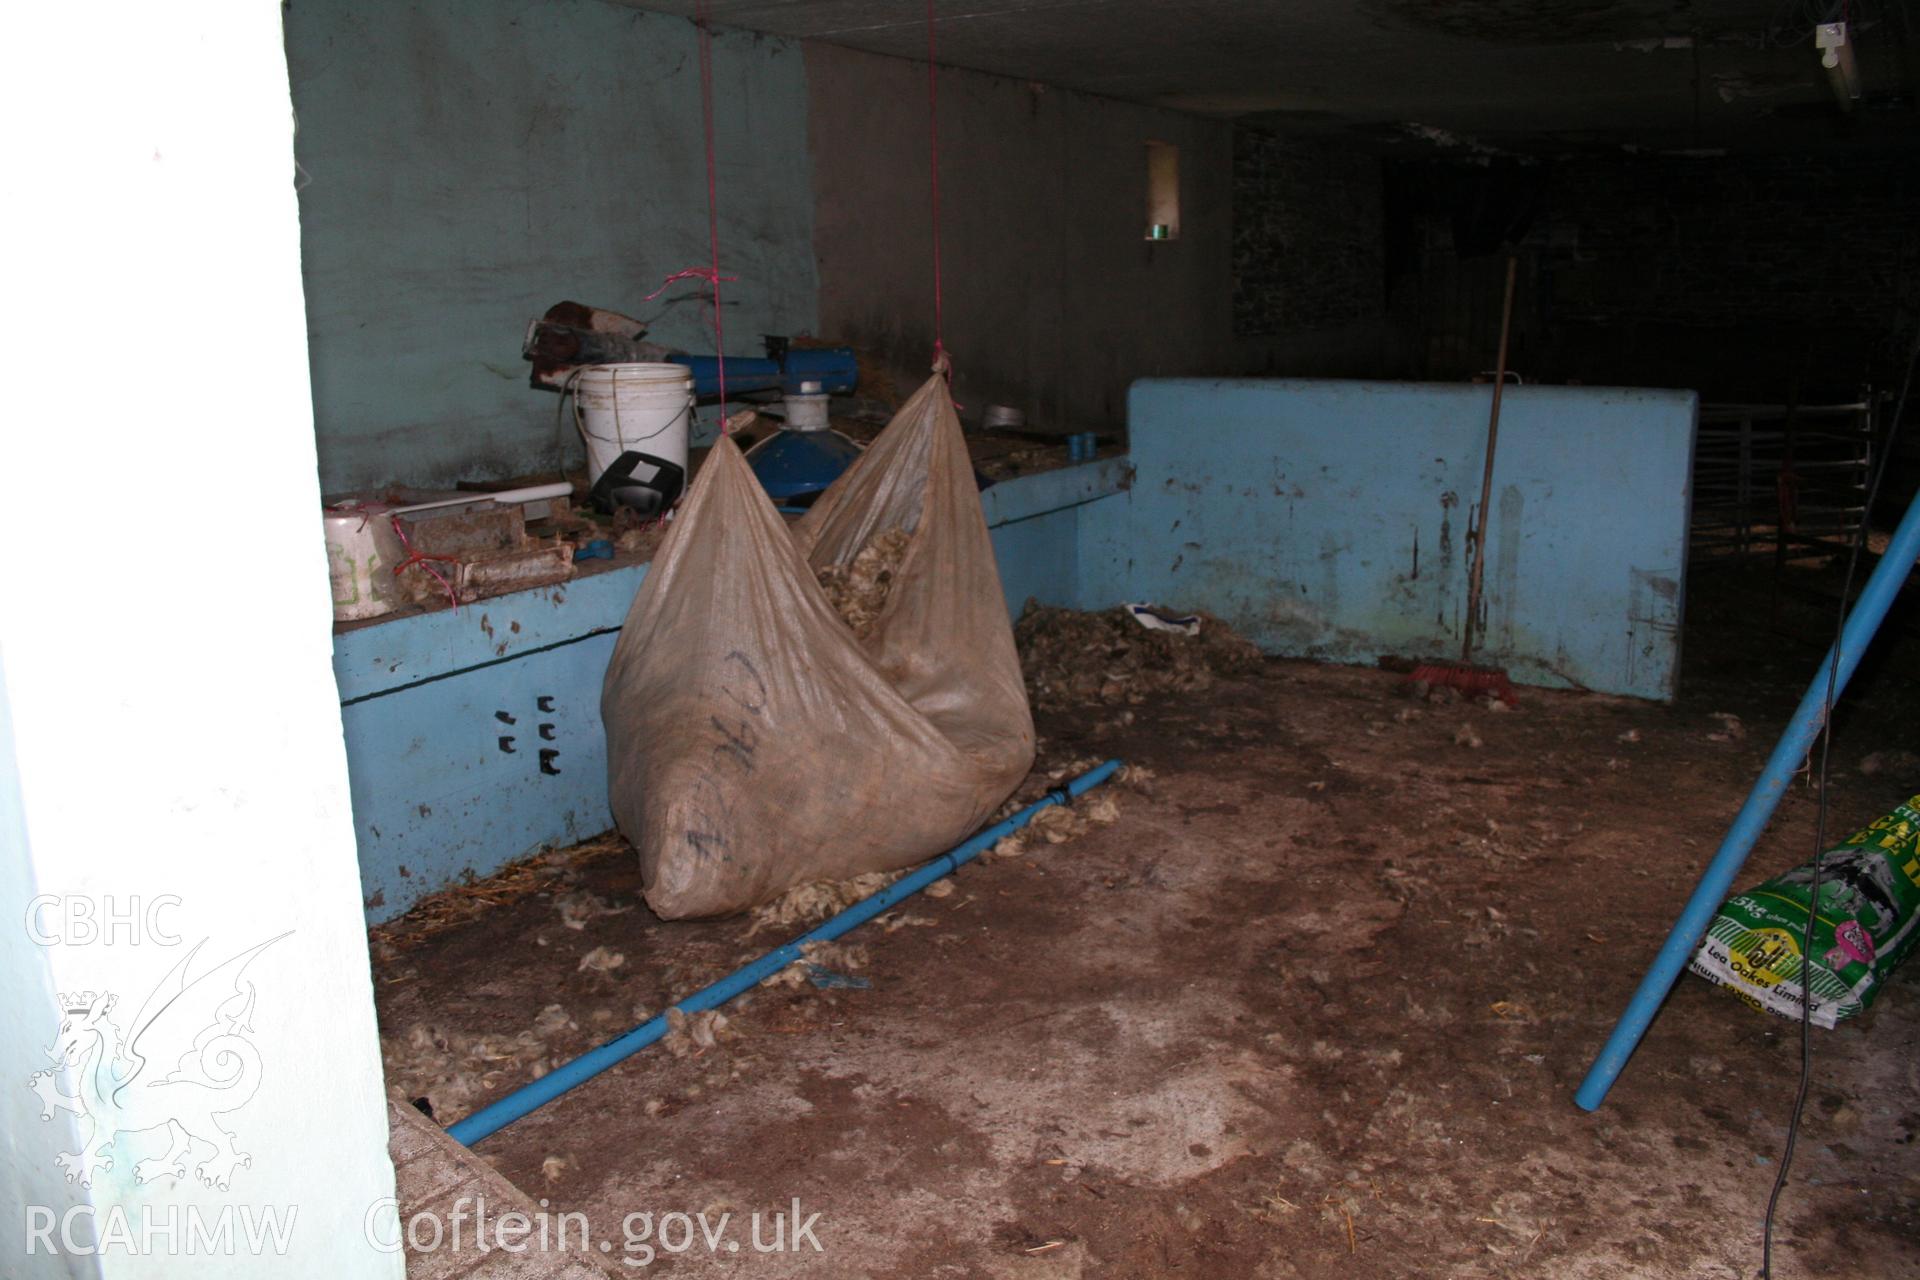 Interior view of cattle shelter. Photographic survey of the southern range of cowhouses at Tan-y-Graig Farm, Llanfarian. Conducted by Geoff Ward and John Wiles, 11th December 2006.